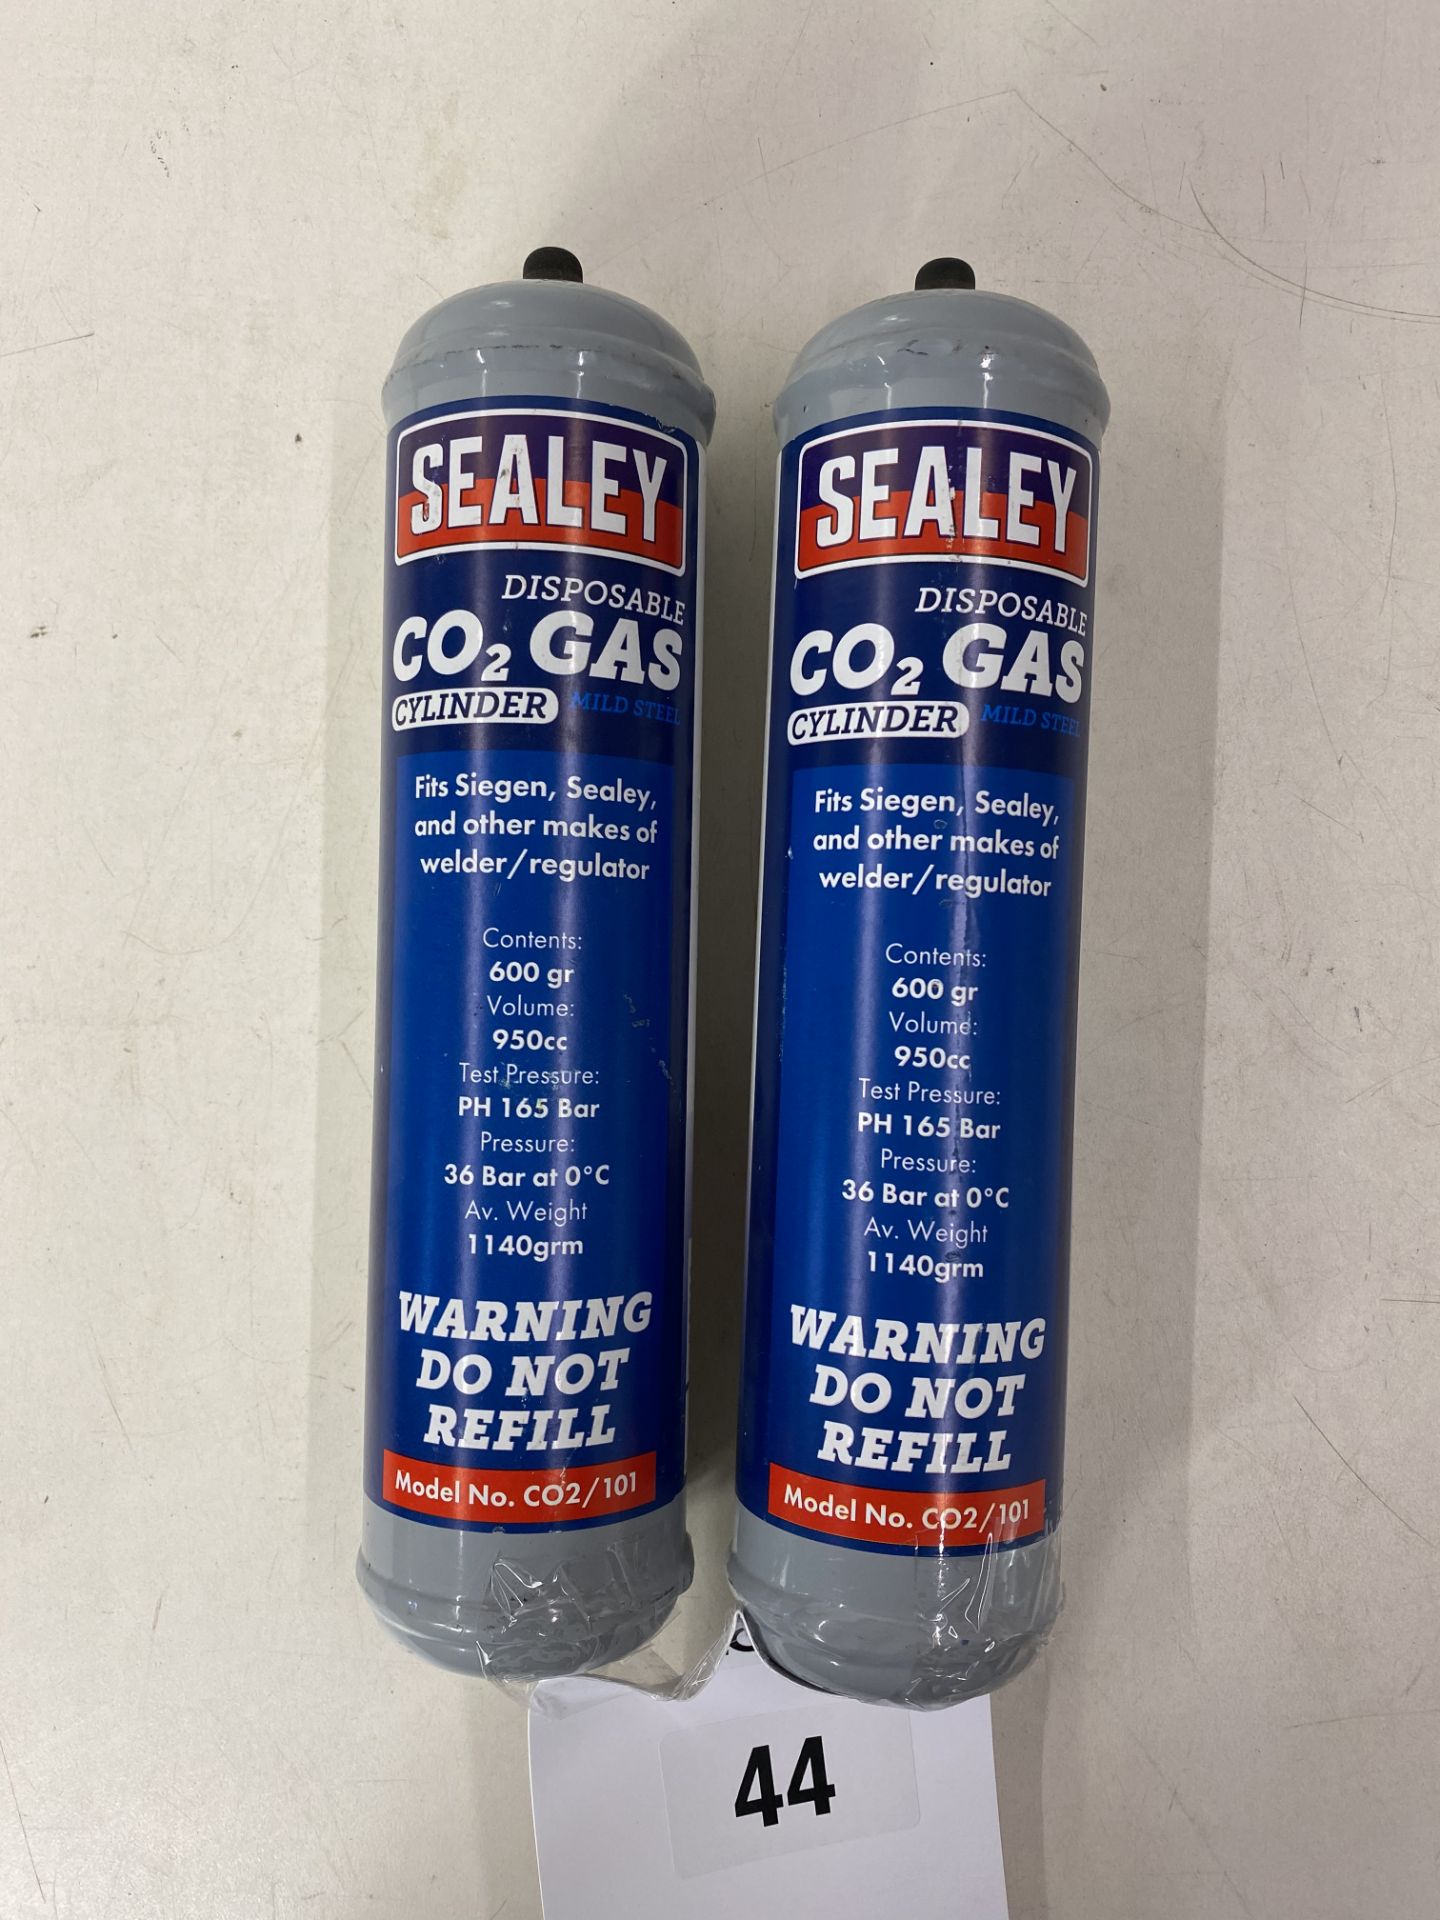 2 x Sealey Carbon Dioxide Gas Disposable Cylinder CO2/101